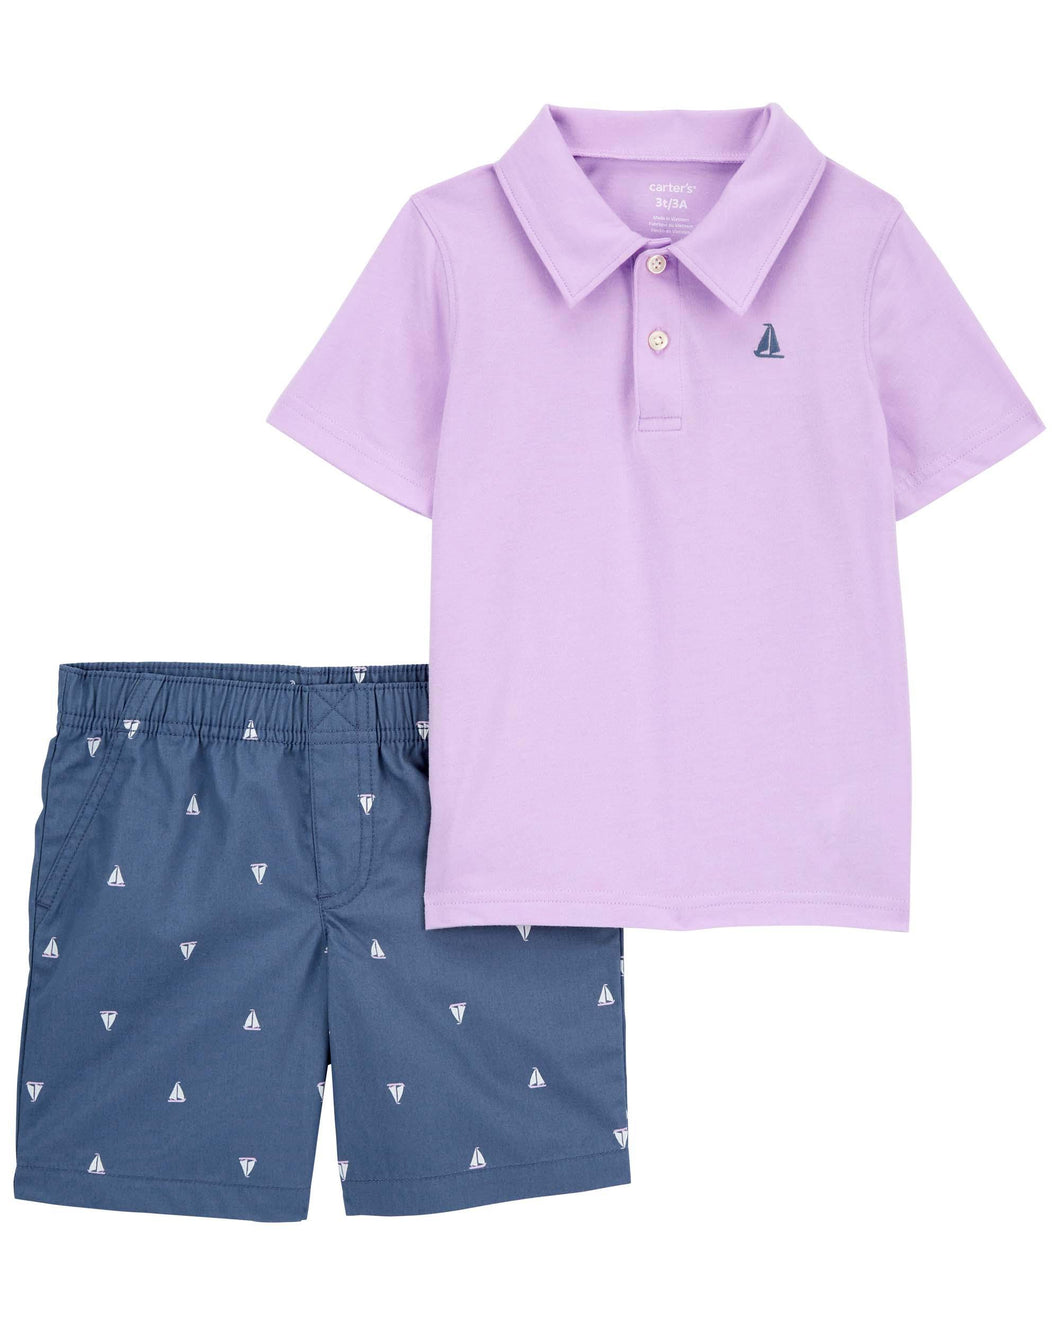 Carter's 2pc Toddler Boy Purple Polo and Sailboat Shorts Set